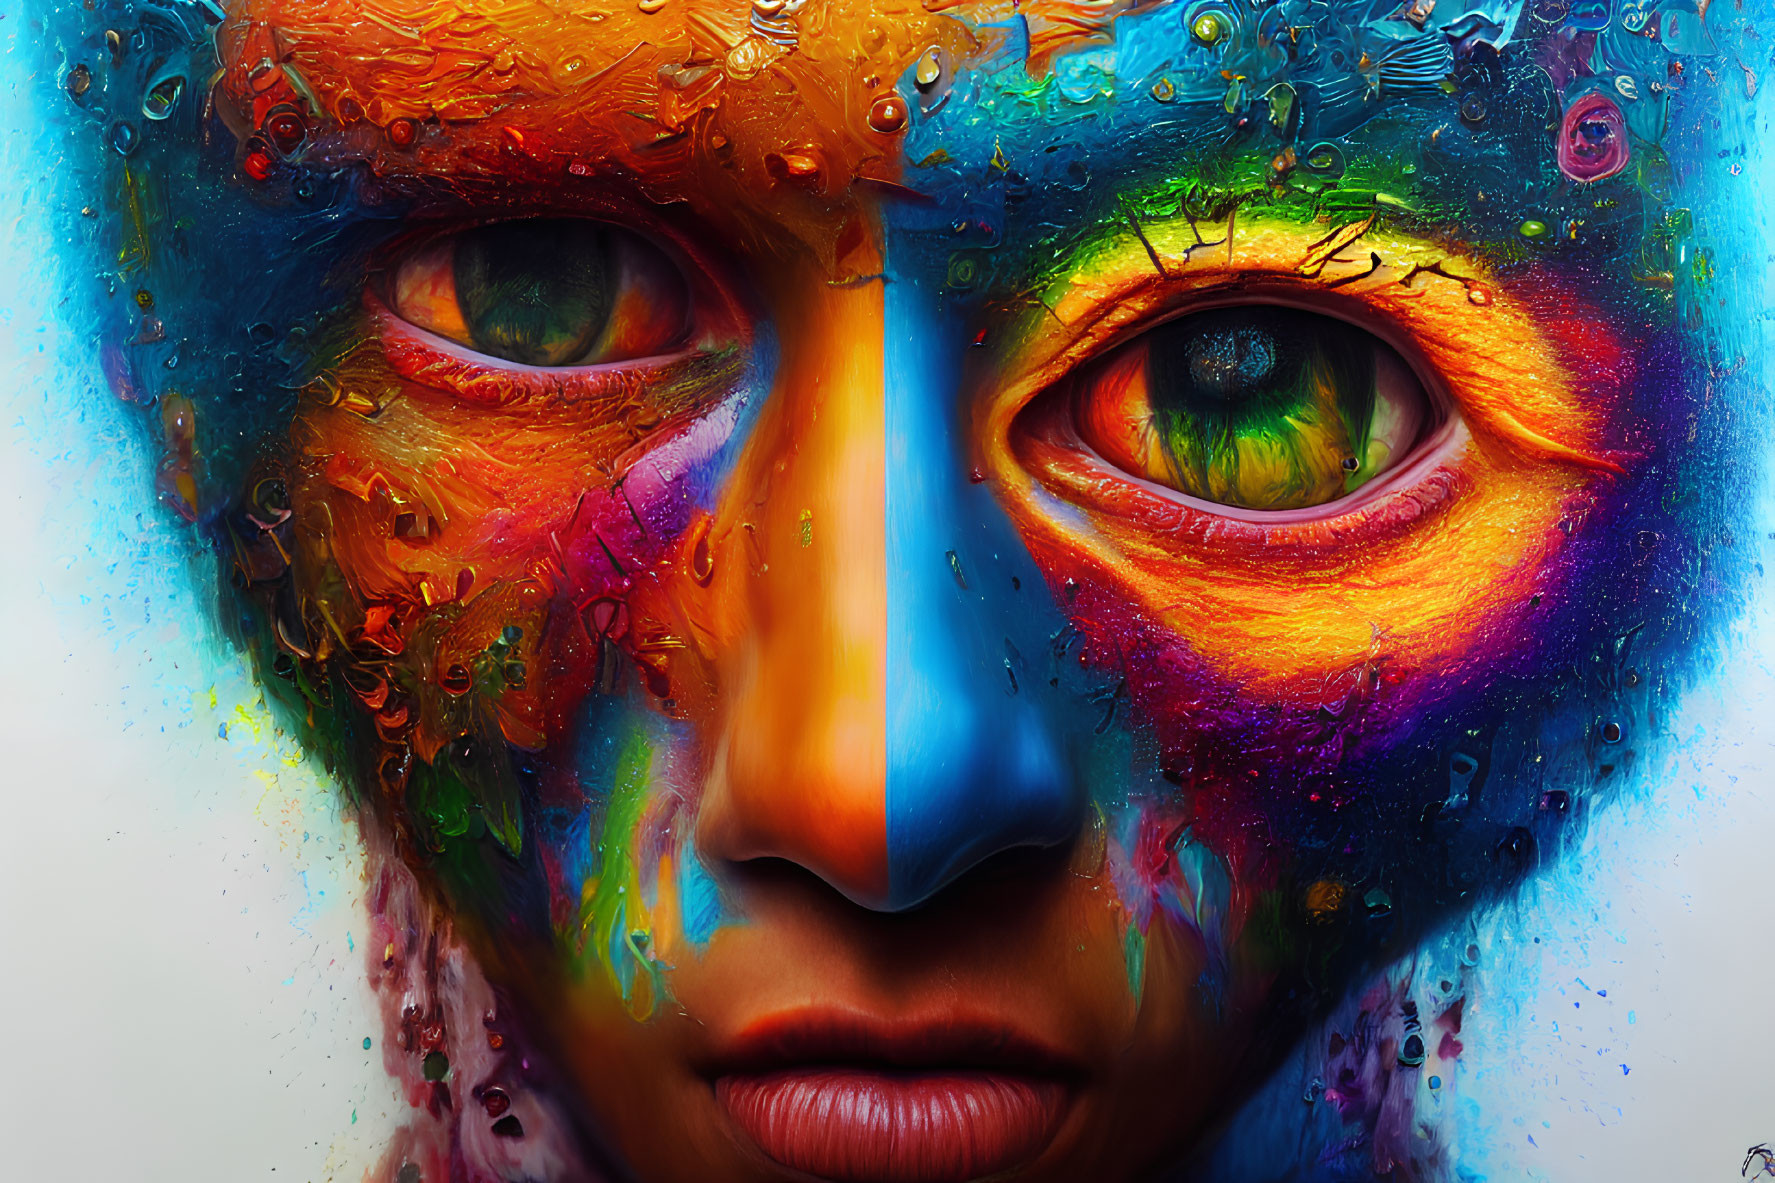 Detailed close-up of vibrant, colorful face with realistic eyes and textured, paint-dripped skin.